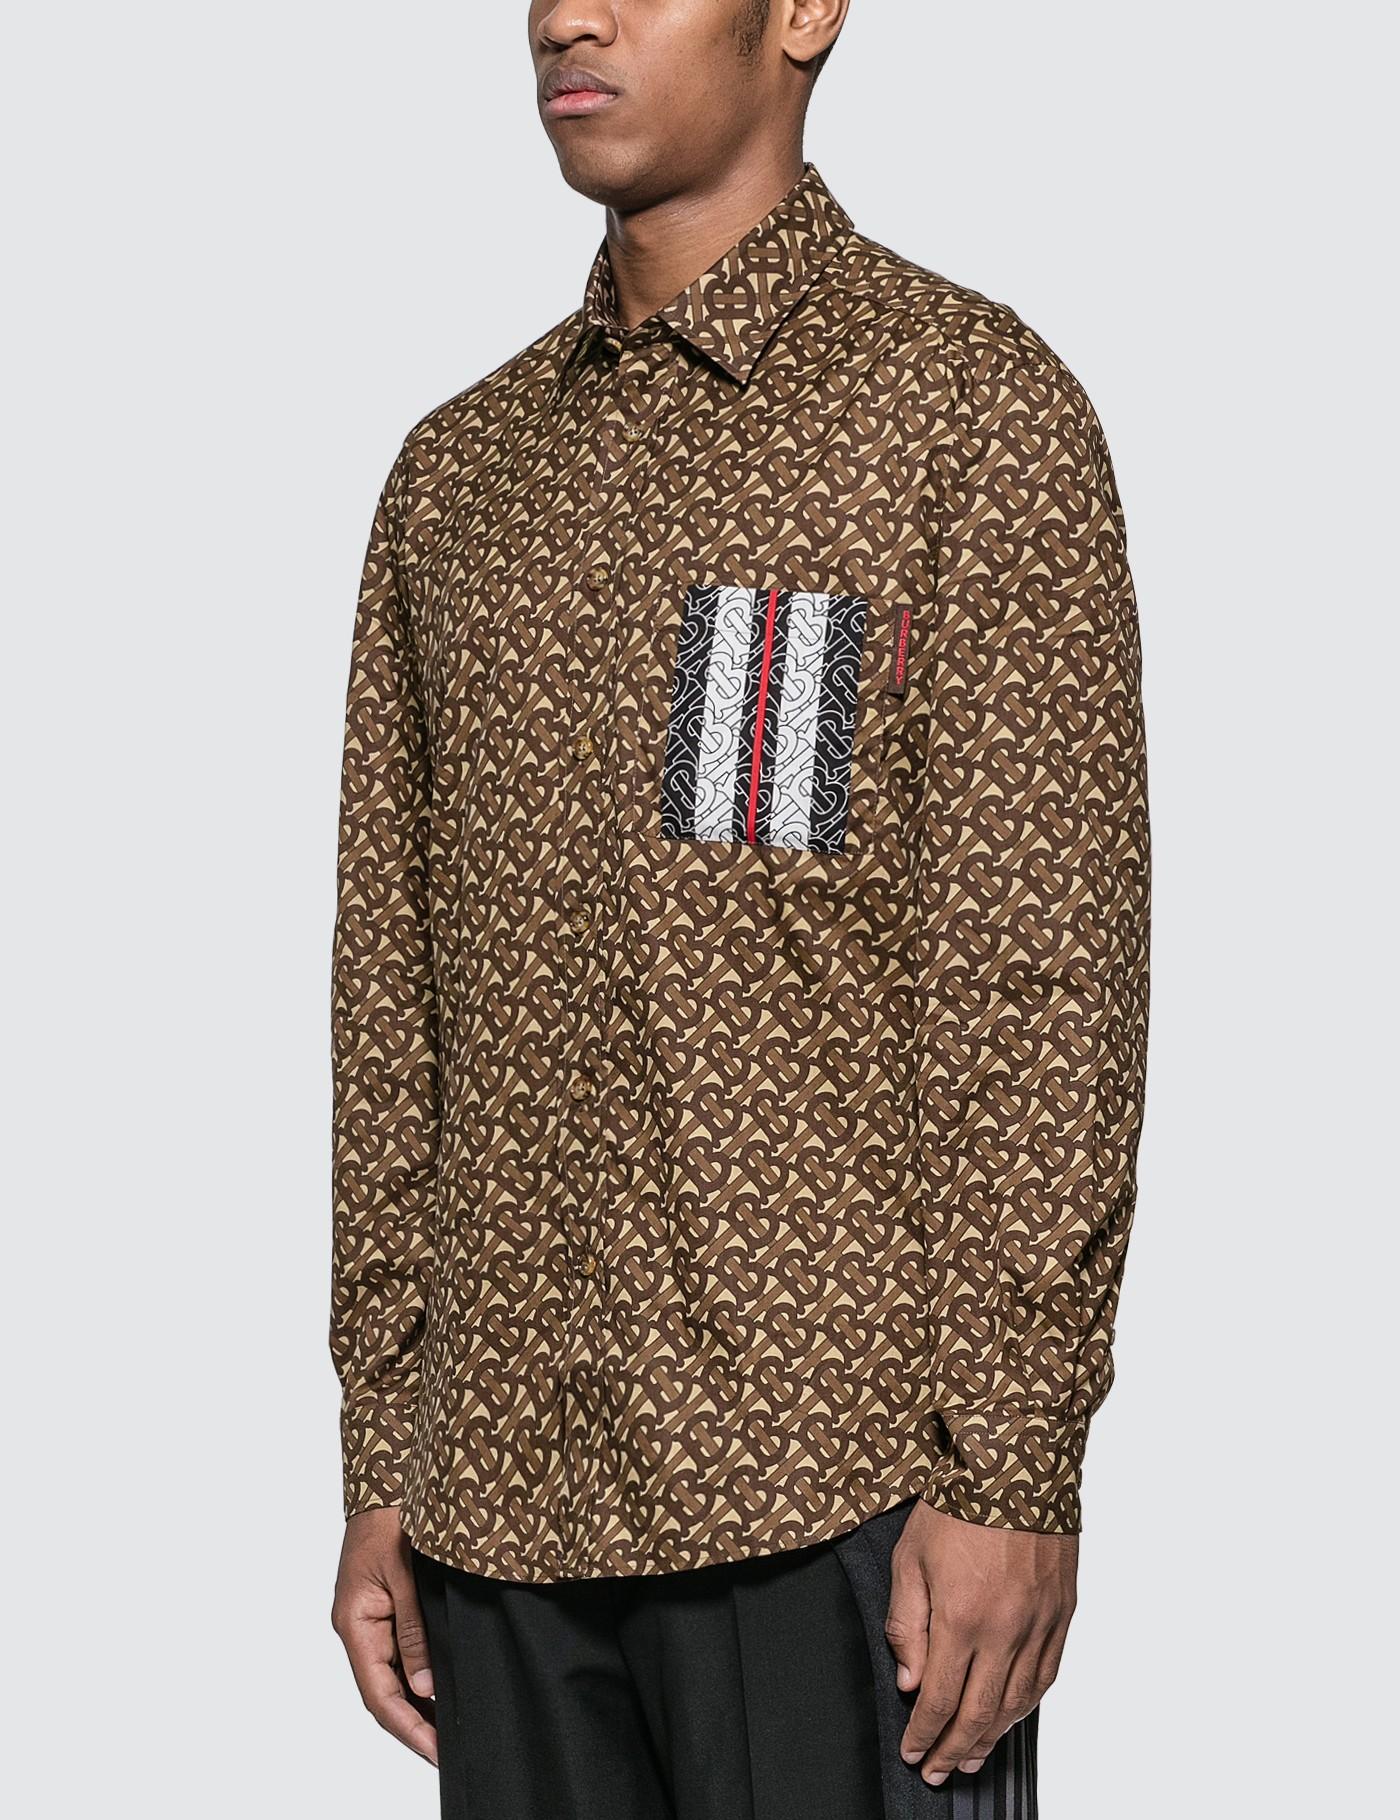 Burberry Cotton Monogram Printed Long Sleeve Shirt in Brown for Men - Lyst